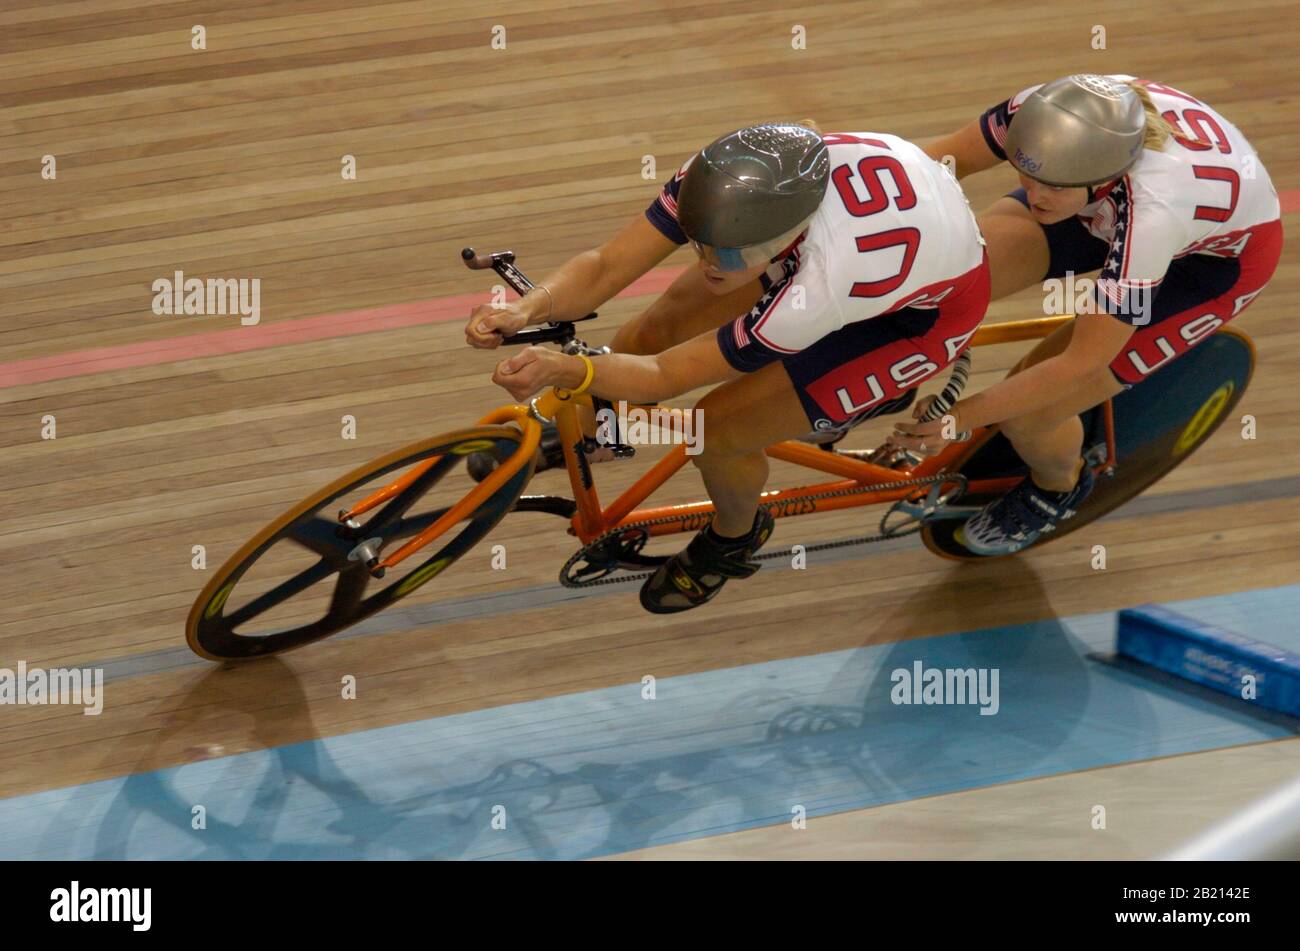 Athens, Greece 18SEP04: Blind cyclist Karissa Whitsell (rear) and sighted  pilot Katie Compton of Team USA competing in the women's B13 tandem cycling 1-kilometer time trial final at the Athens Paralympic Games. The pair finished second for a silver medal. ©Bob Daemmrich Stock Photo